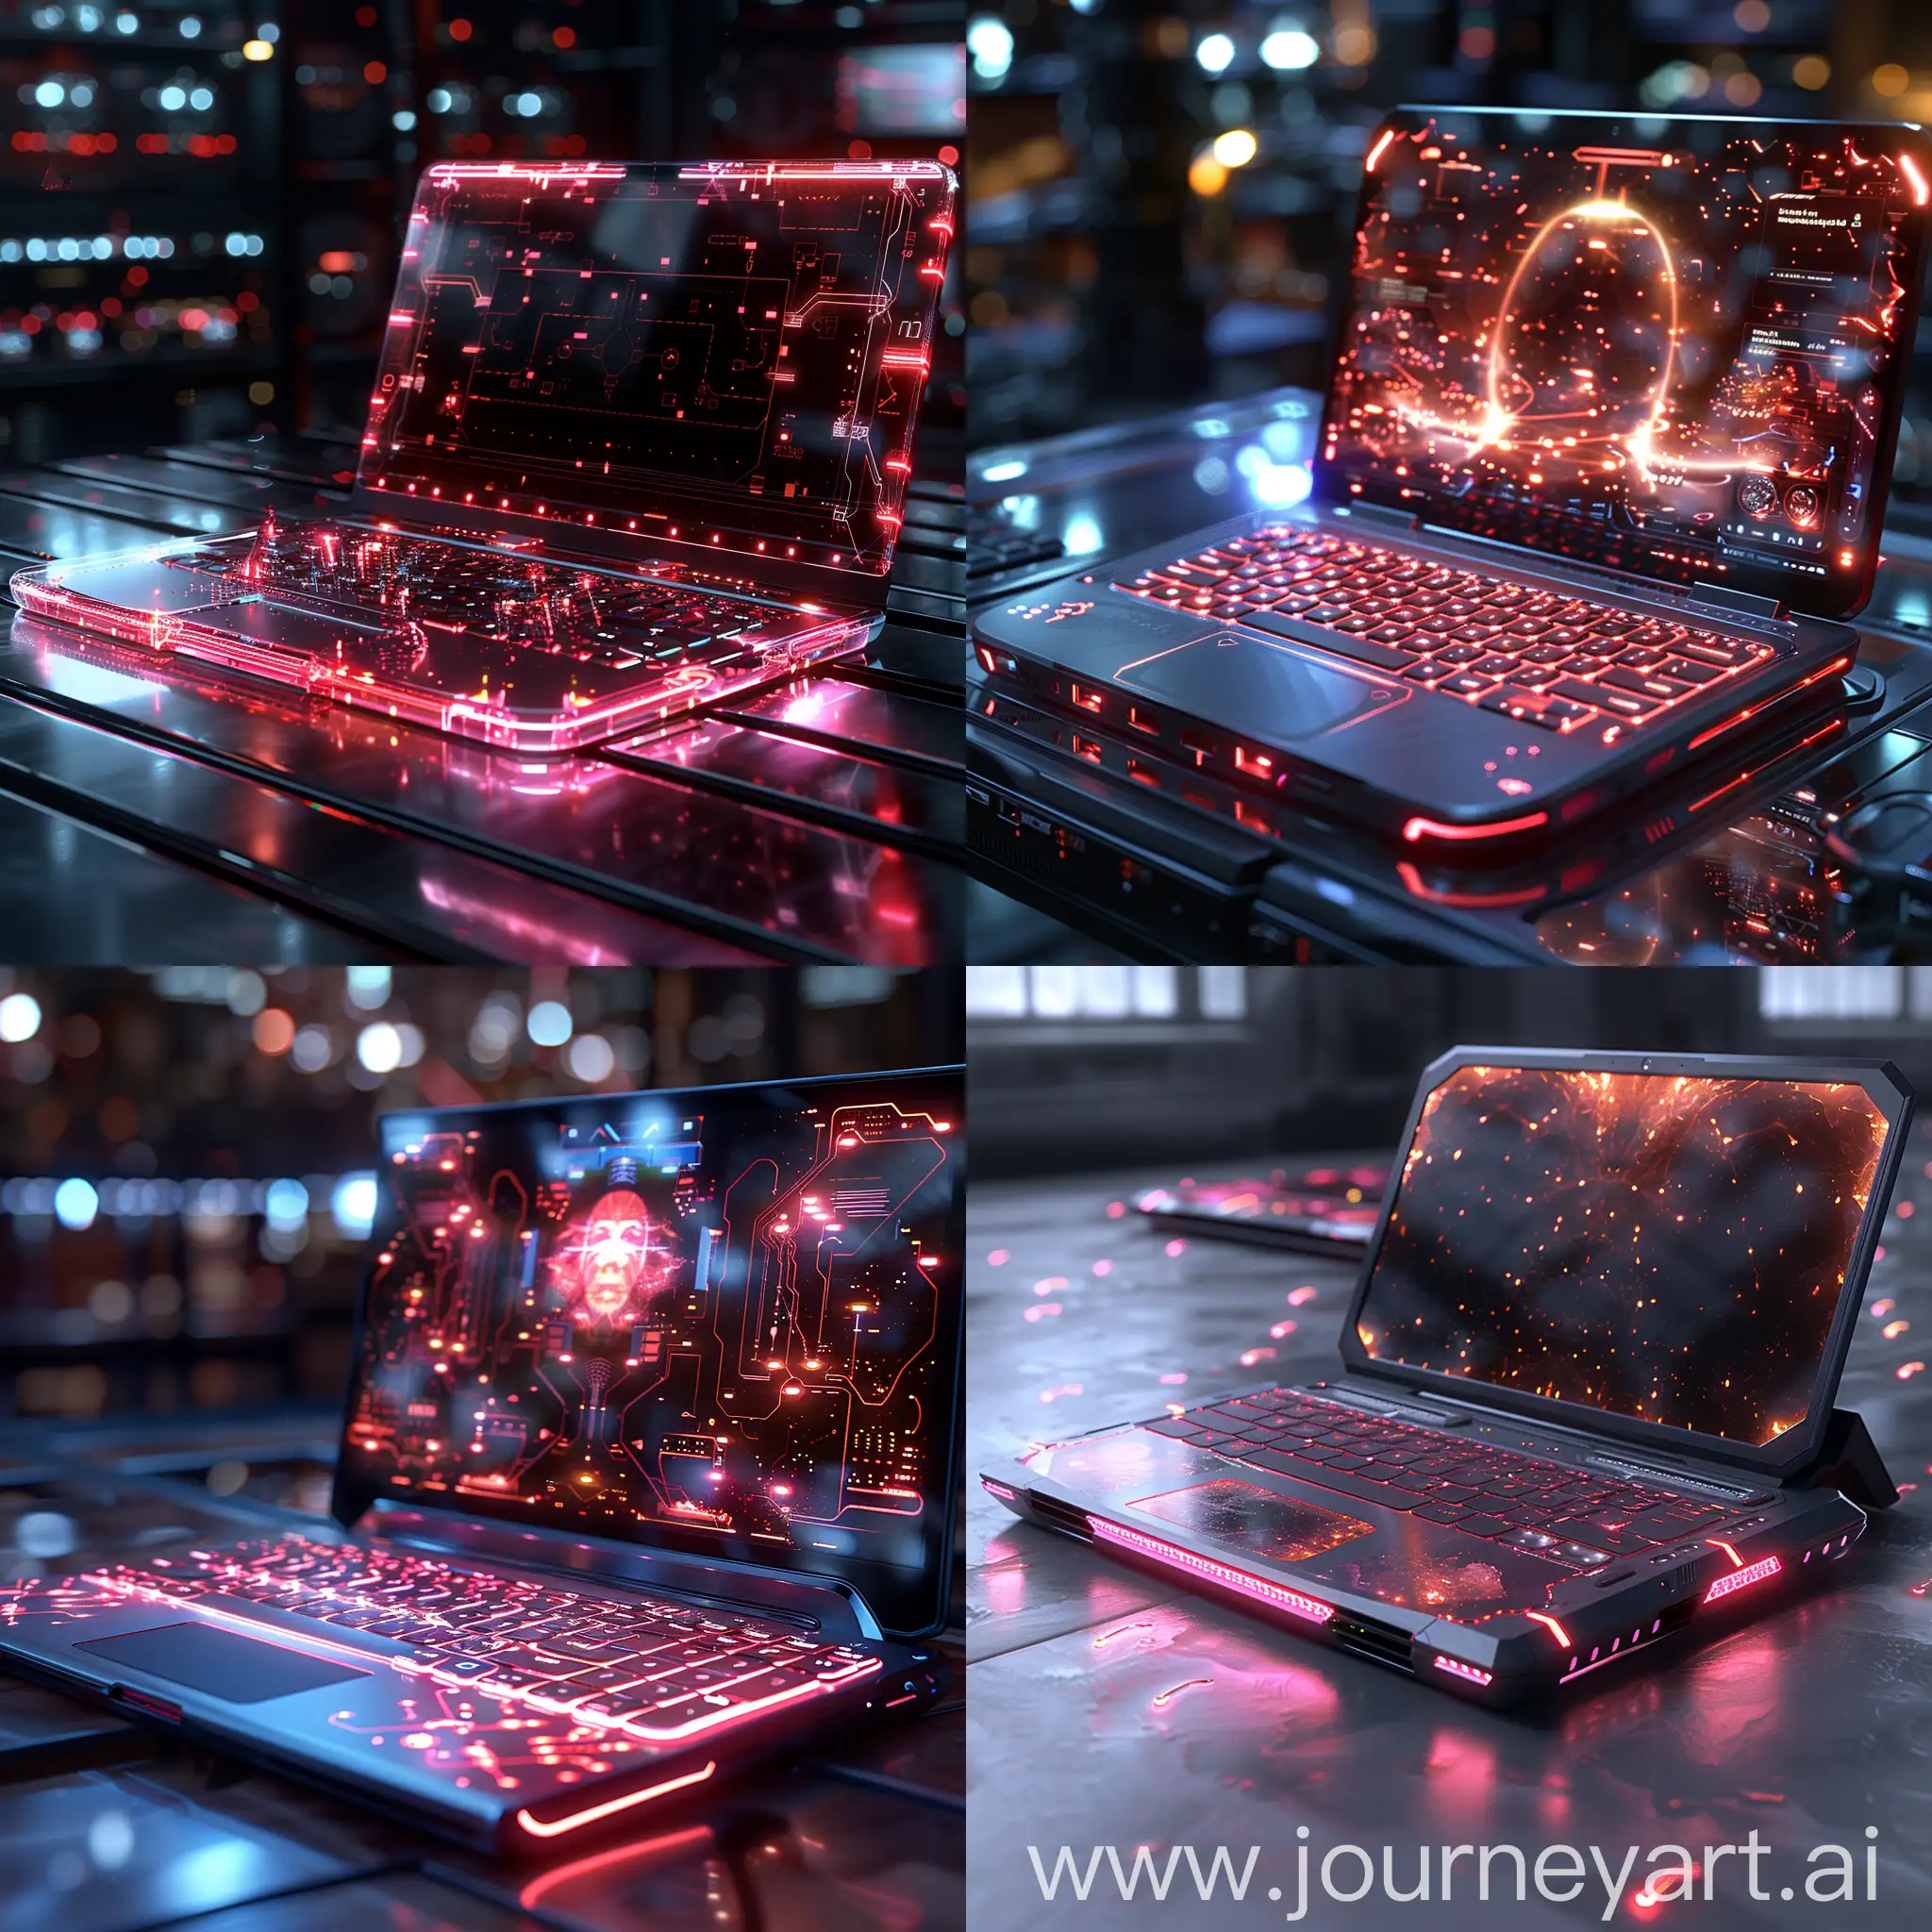 Futuristic-Laptop-with-Flexible-Display-and-Holographic-Interface